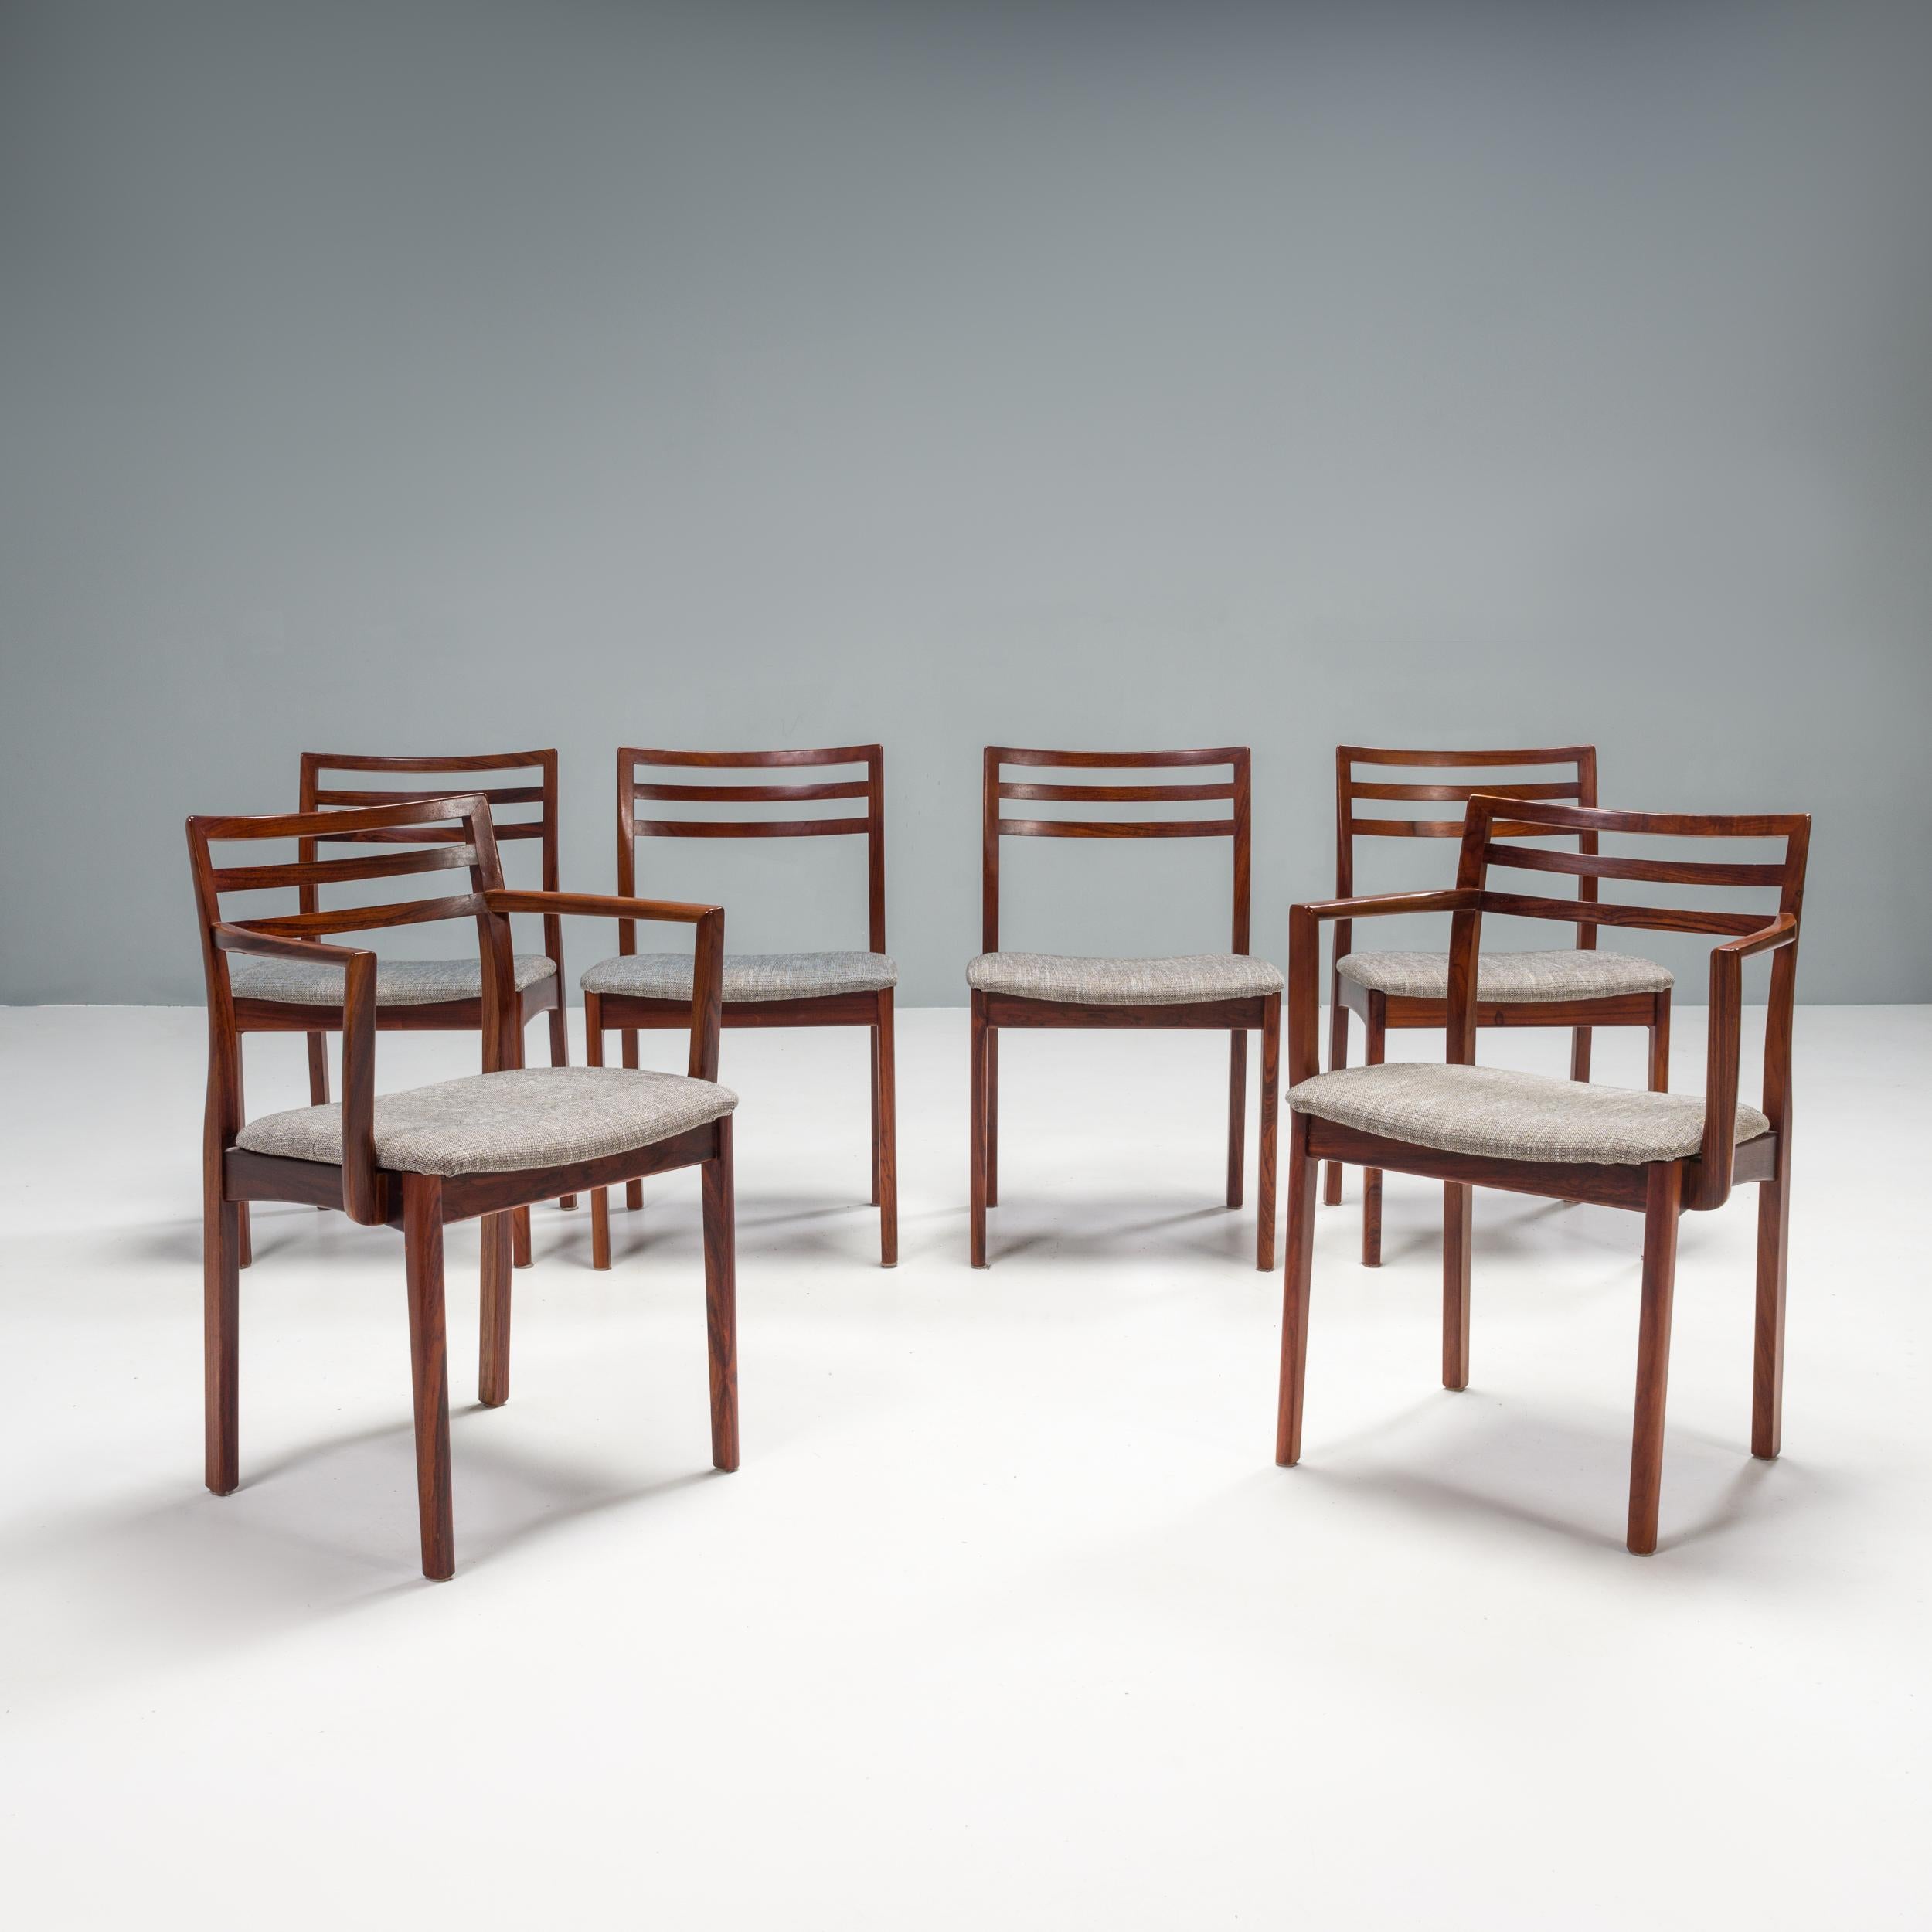 Designed and made by Dyrlund in Denmark, this set of 1960s dining chairs is a classic example of mid-century modern design.

Comprising four classic dining chairs and two carver-style chairs, the set is constructed from slim profile wooden